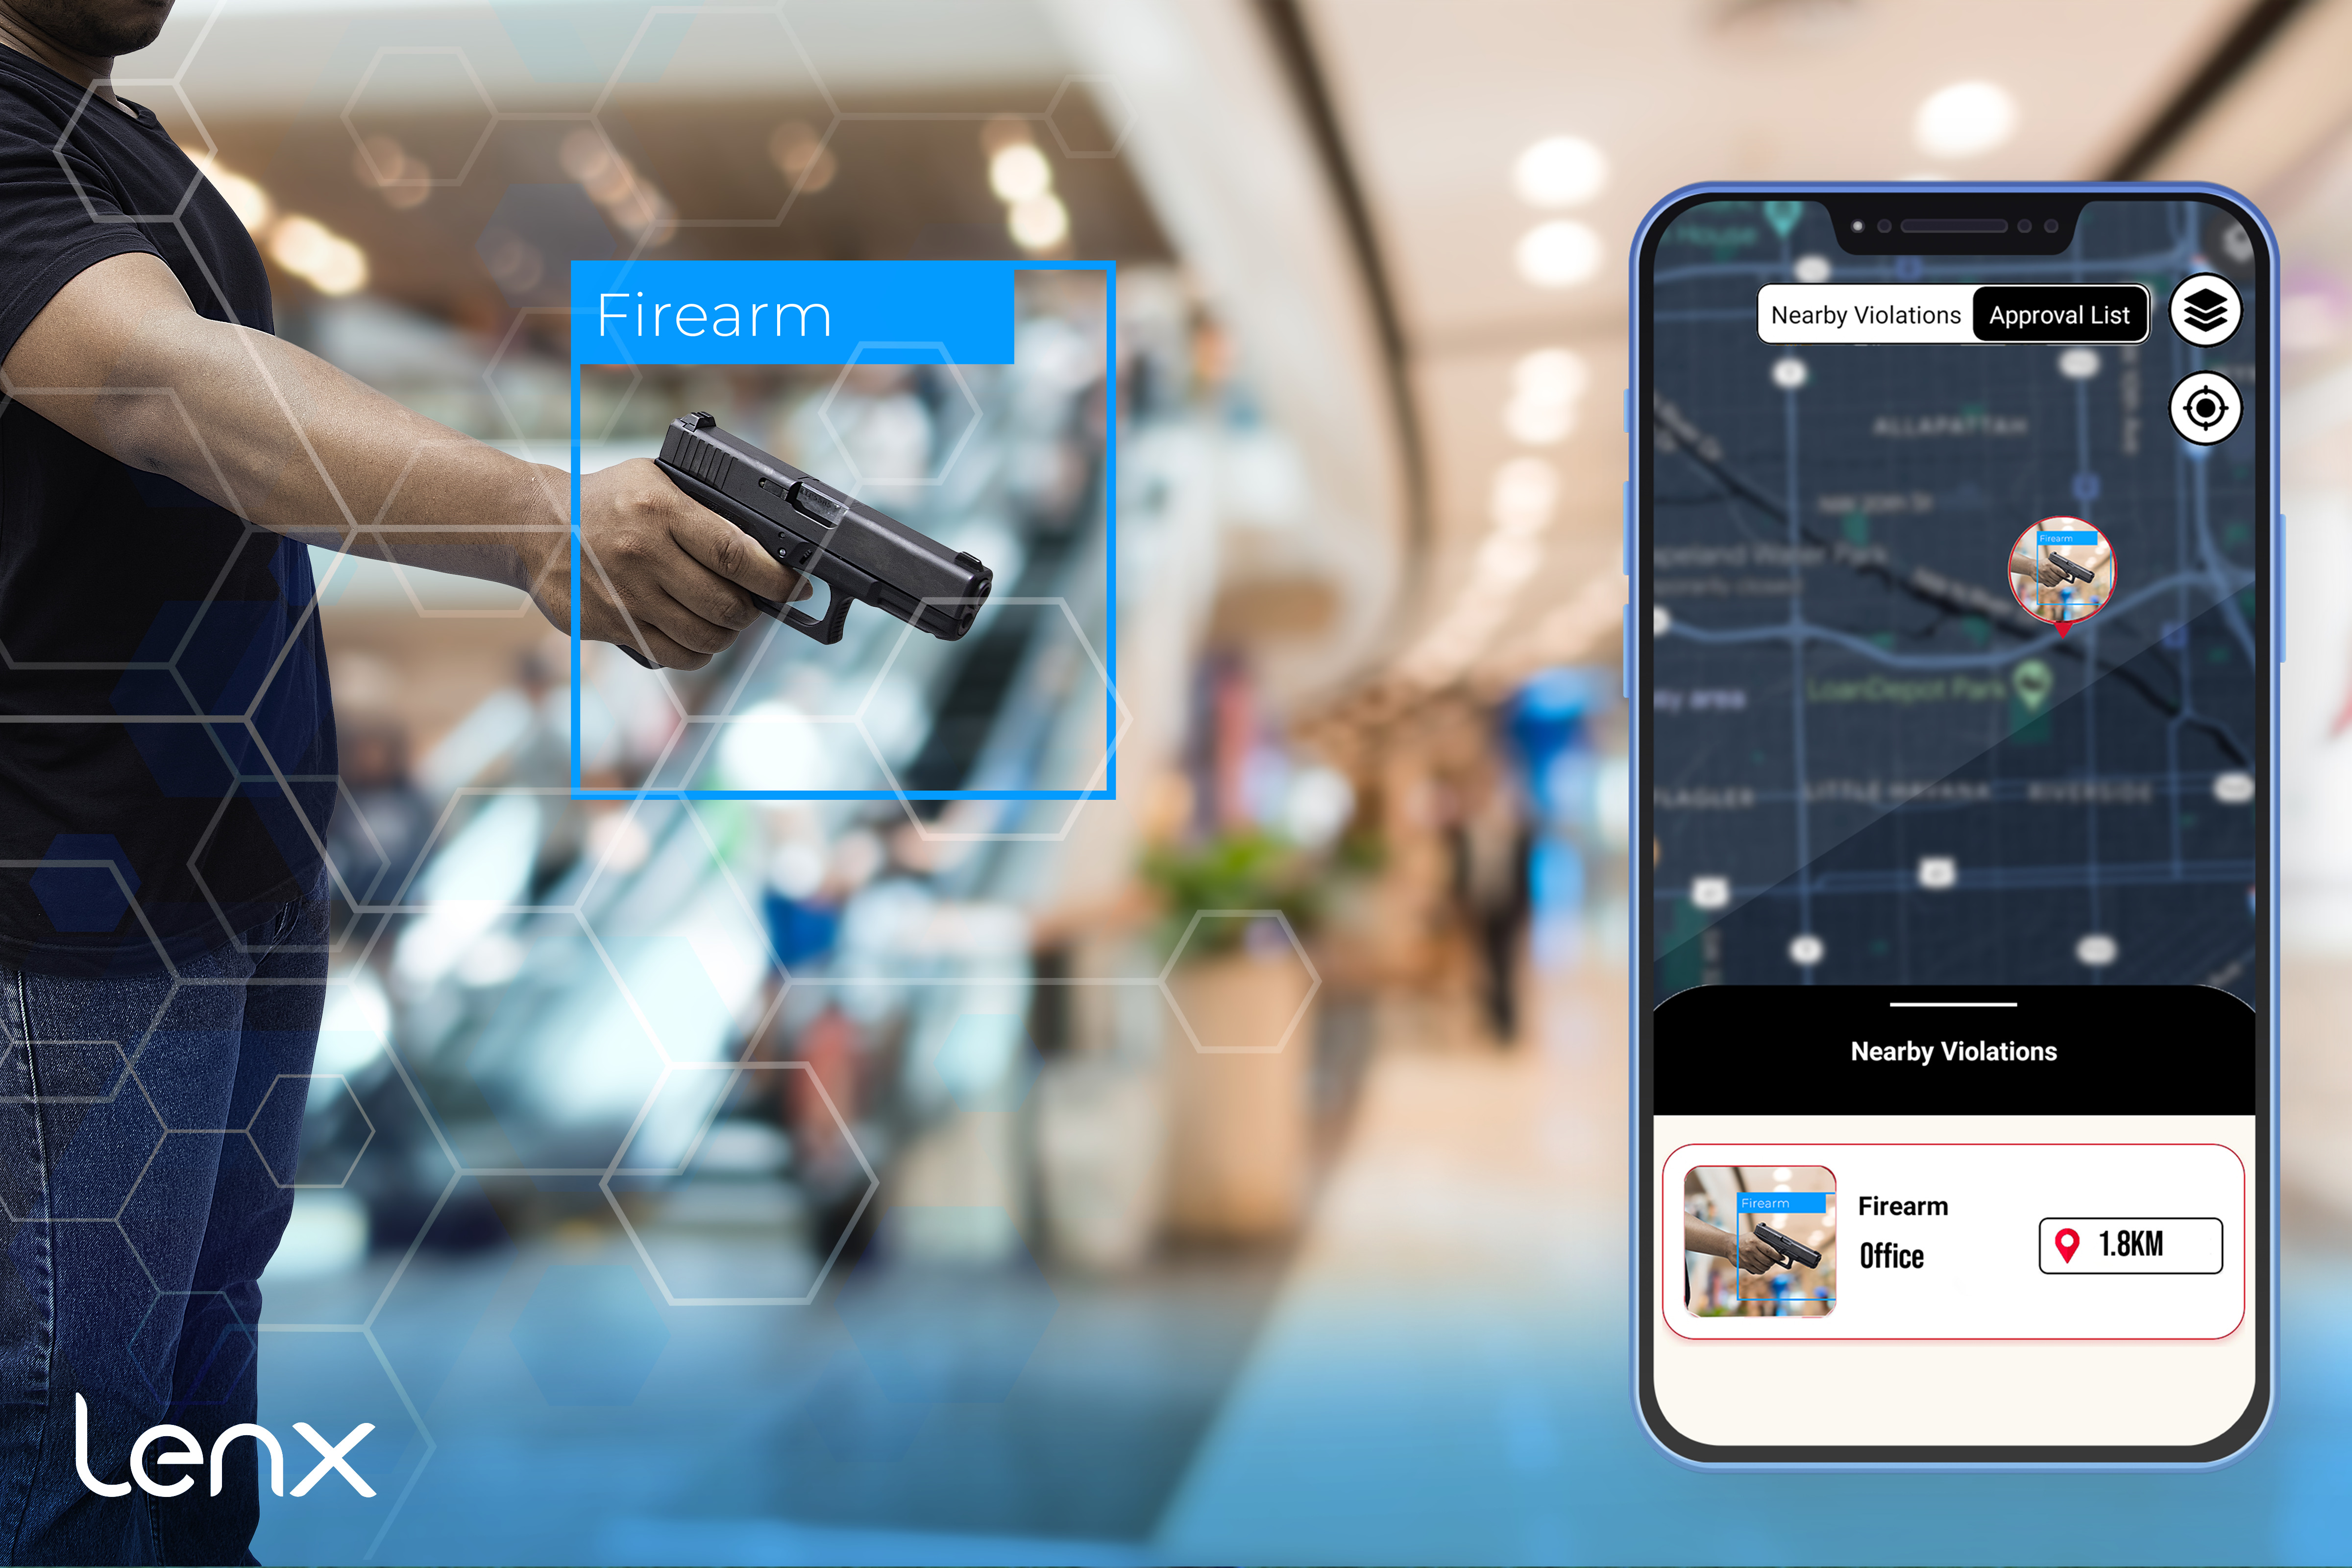 Tracking Weapons With AI Security And Active Shooter Detection Systems